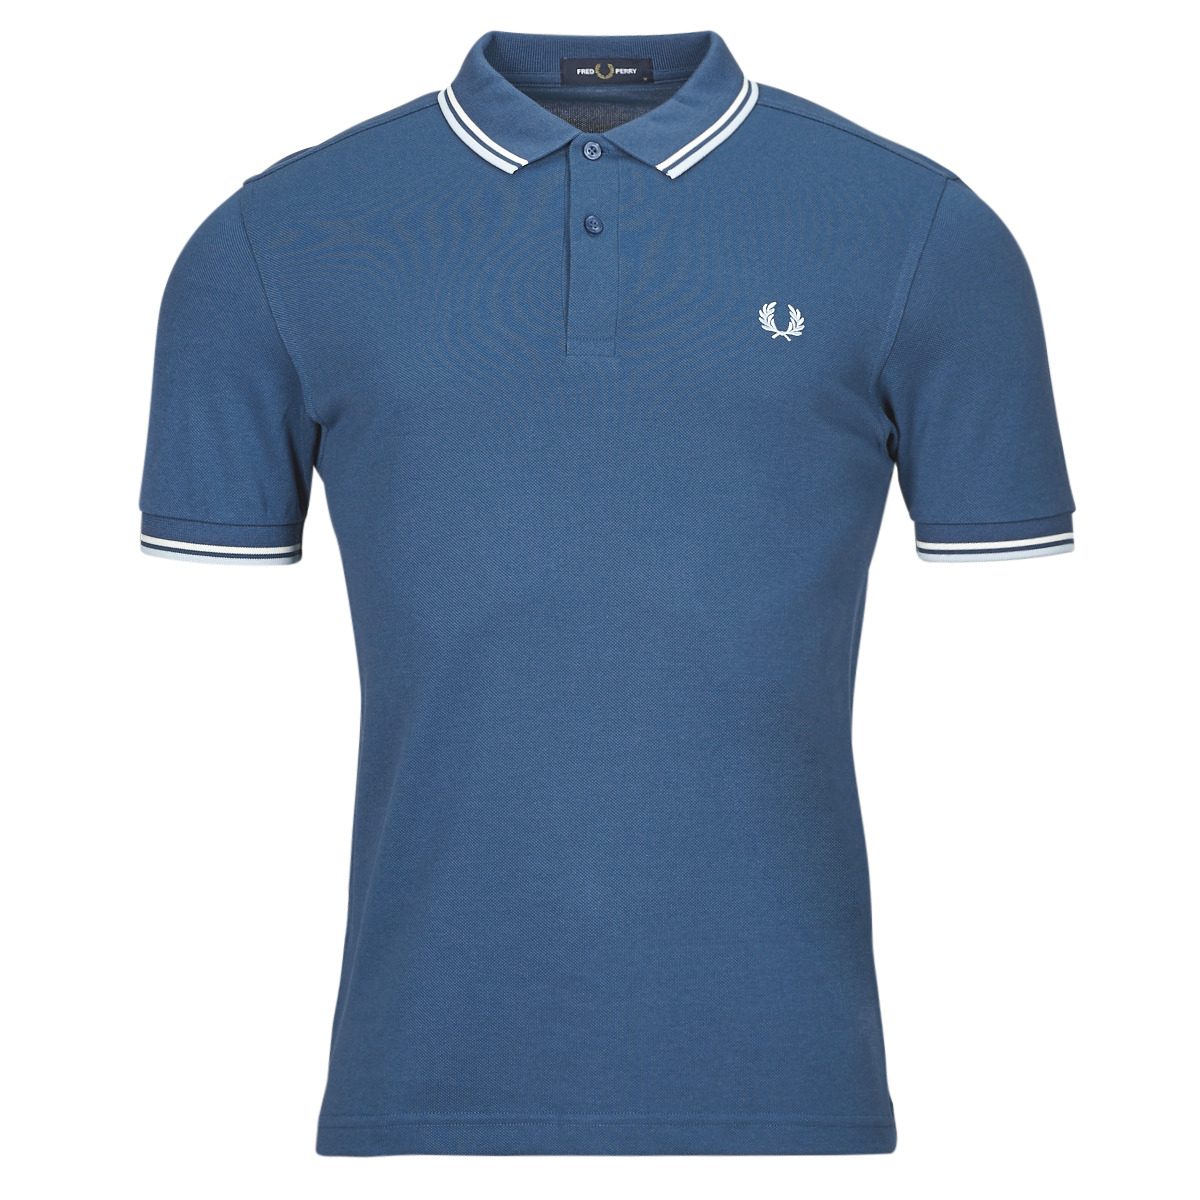 Vêtements Homme Polos manches courtes Fred Perry TWIN TIPPED FRED PERRY SHIRT 